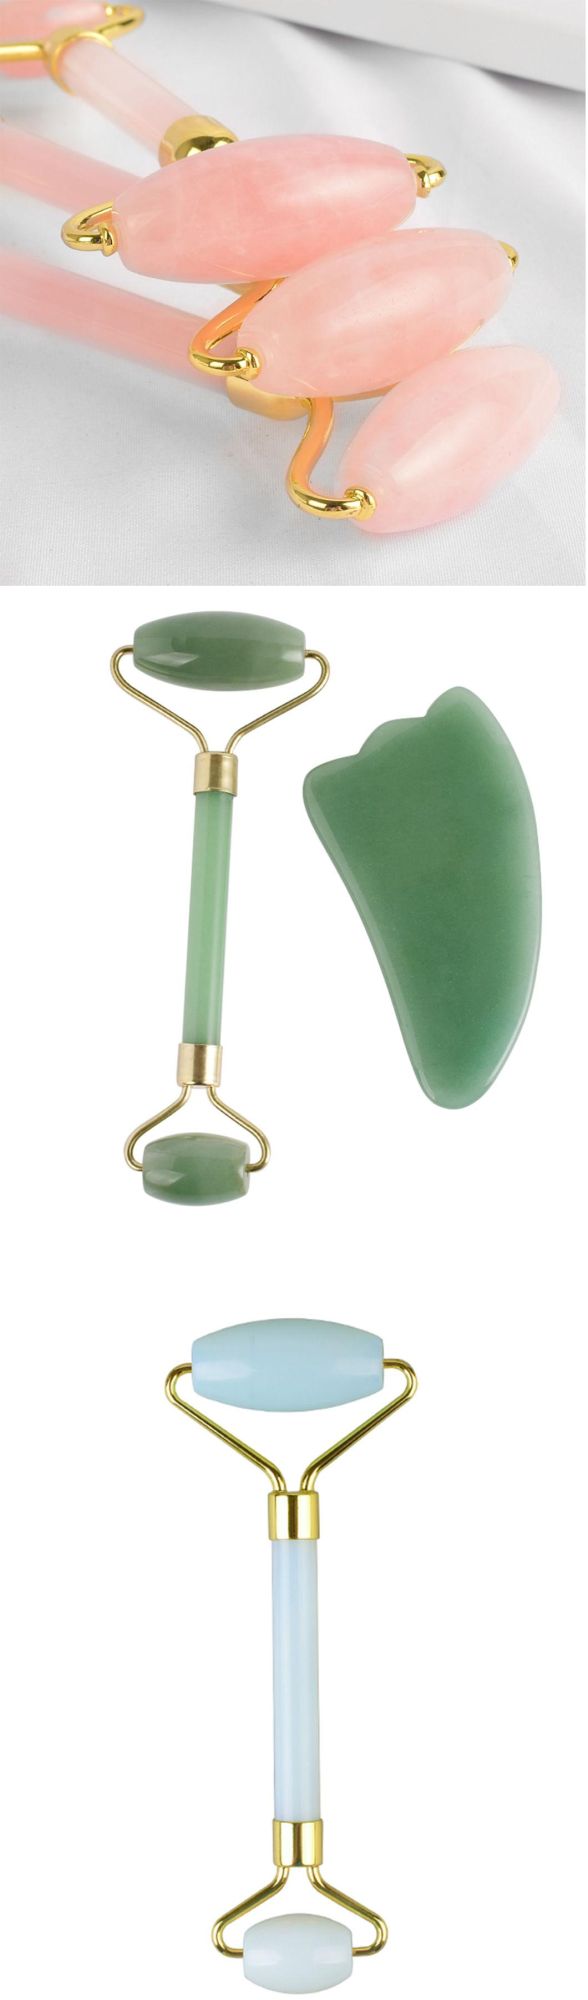 Amazon Hot Deal Jade Roller High Quality Massage Face Roller Gua Sha Set with Box